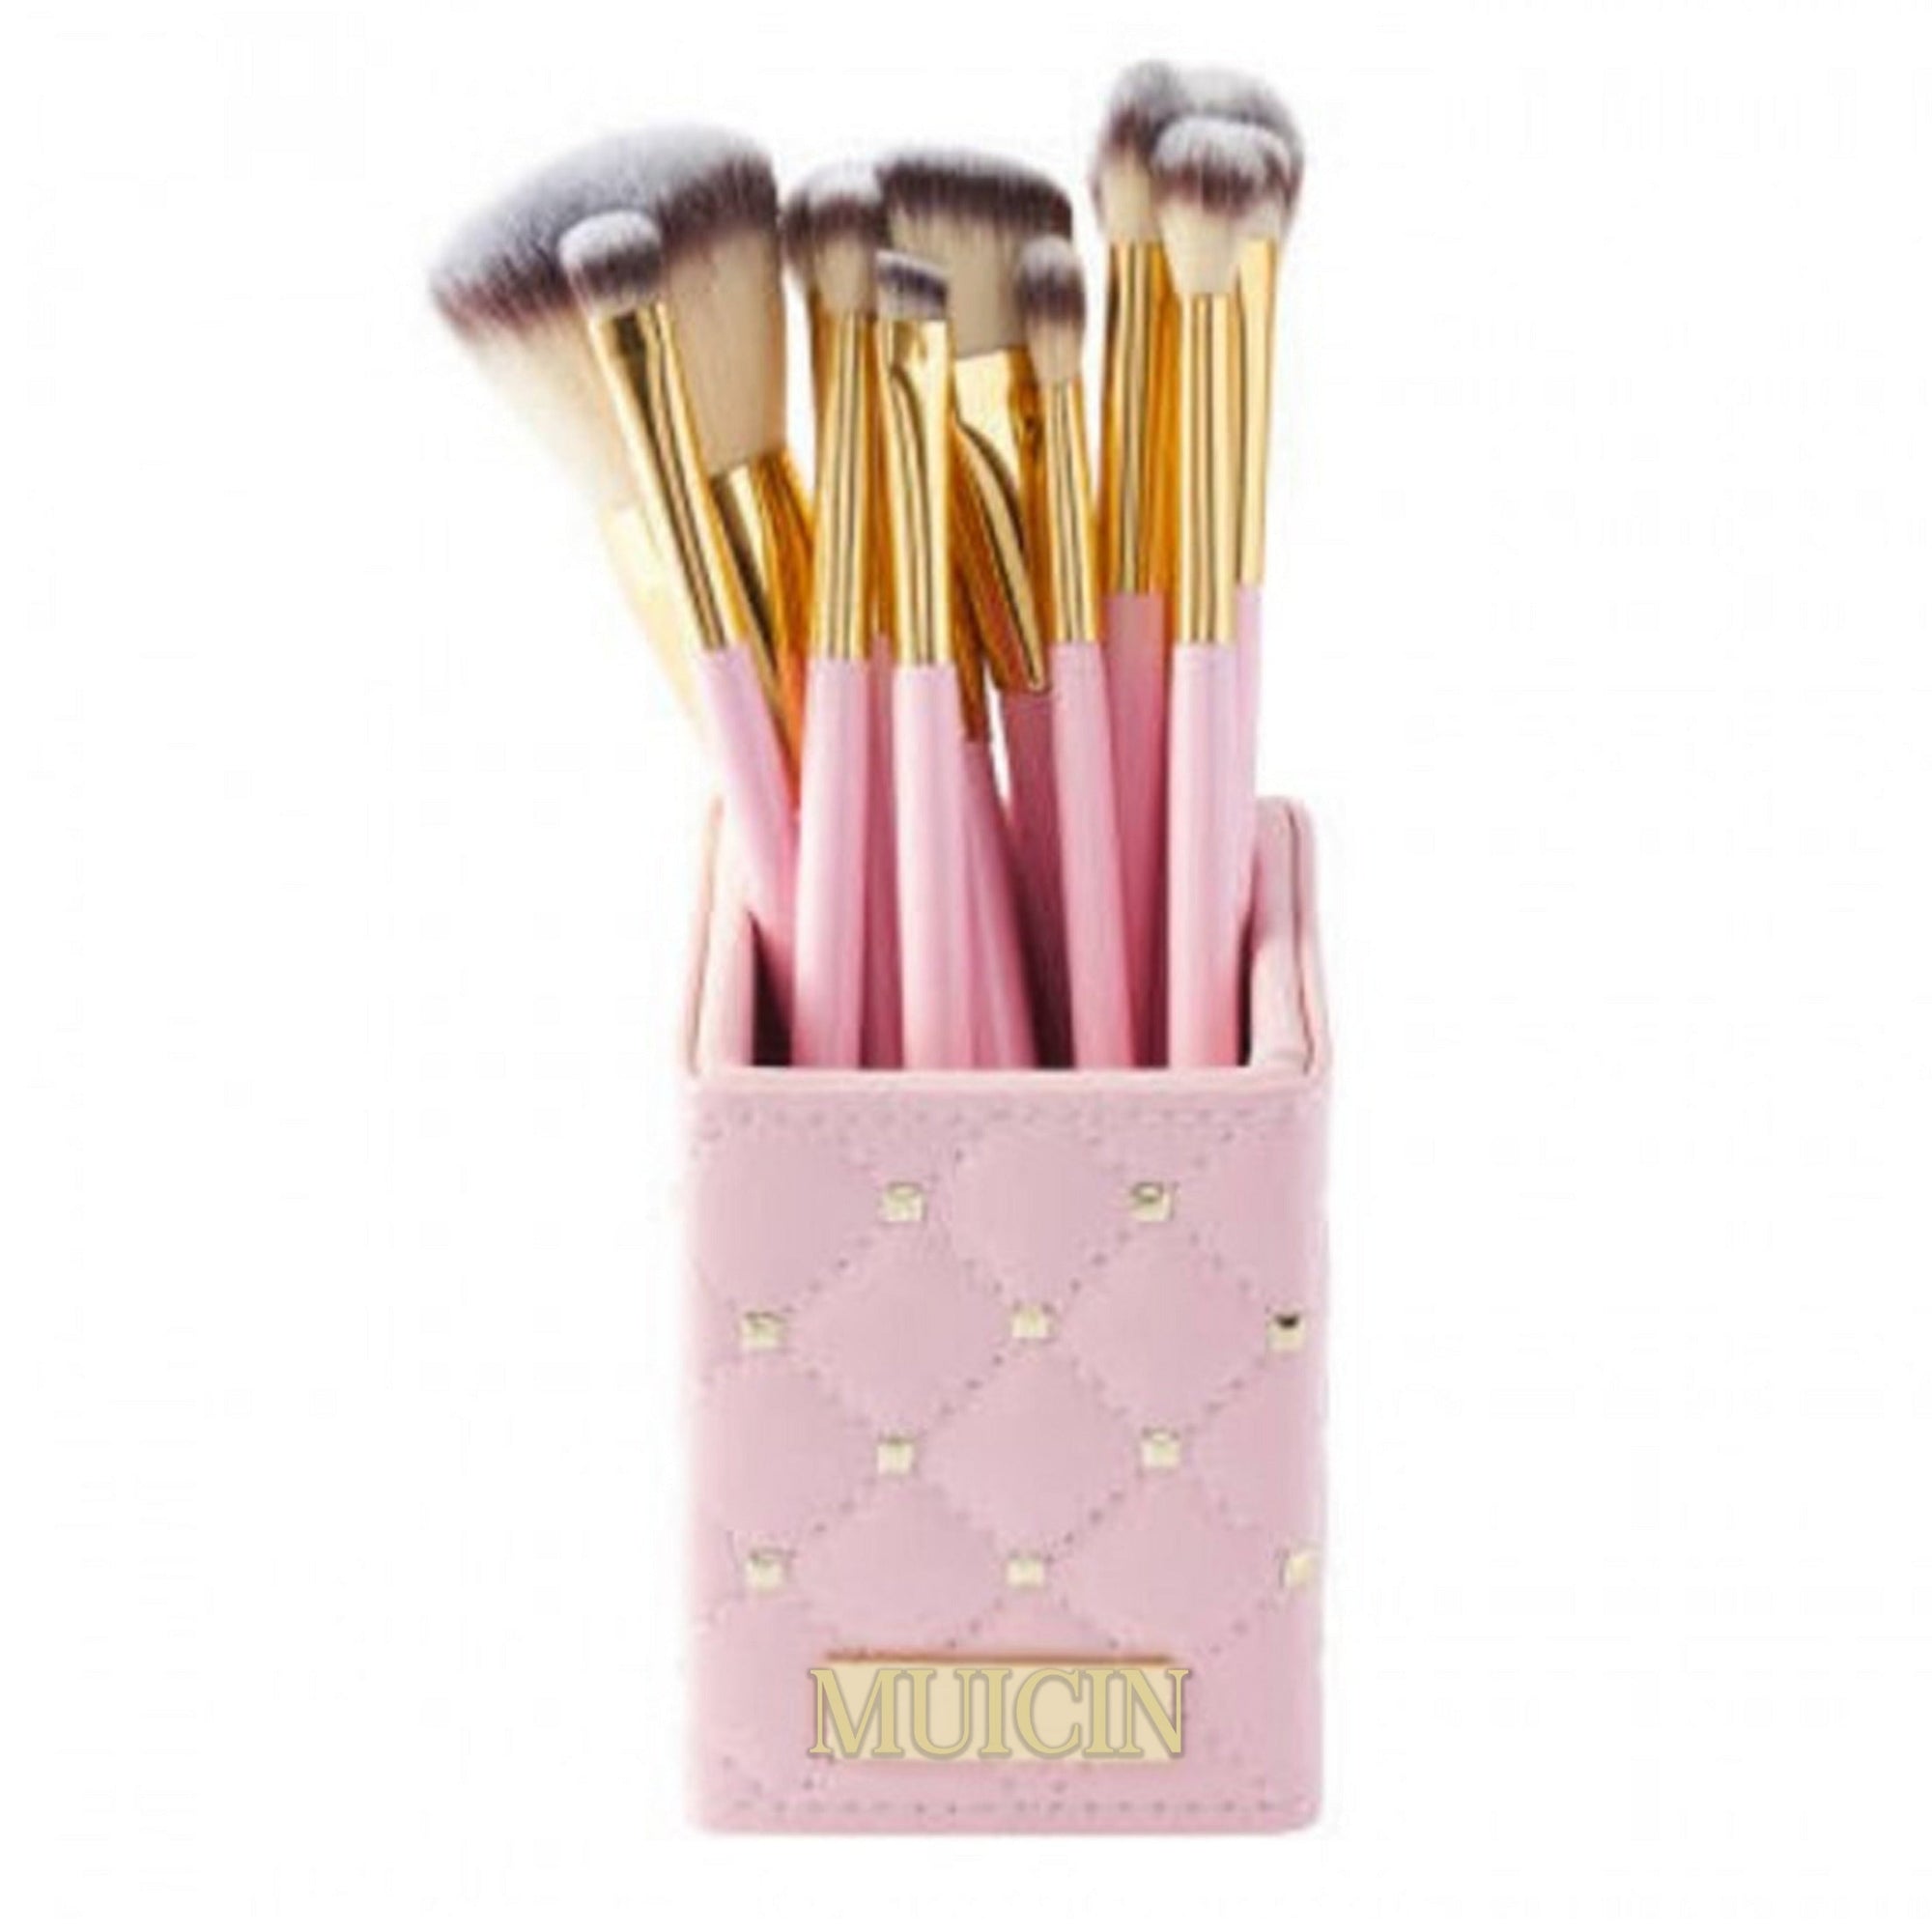 Buy  MUICIN - Natural Hair 12 Pieces Pink Studded Makeup Brushes Set - at Best Price Online in Pakistan